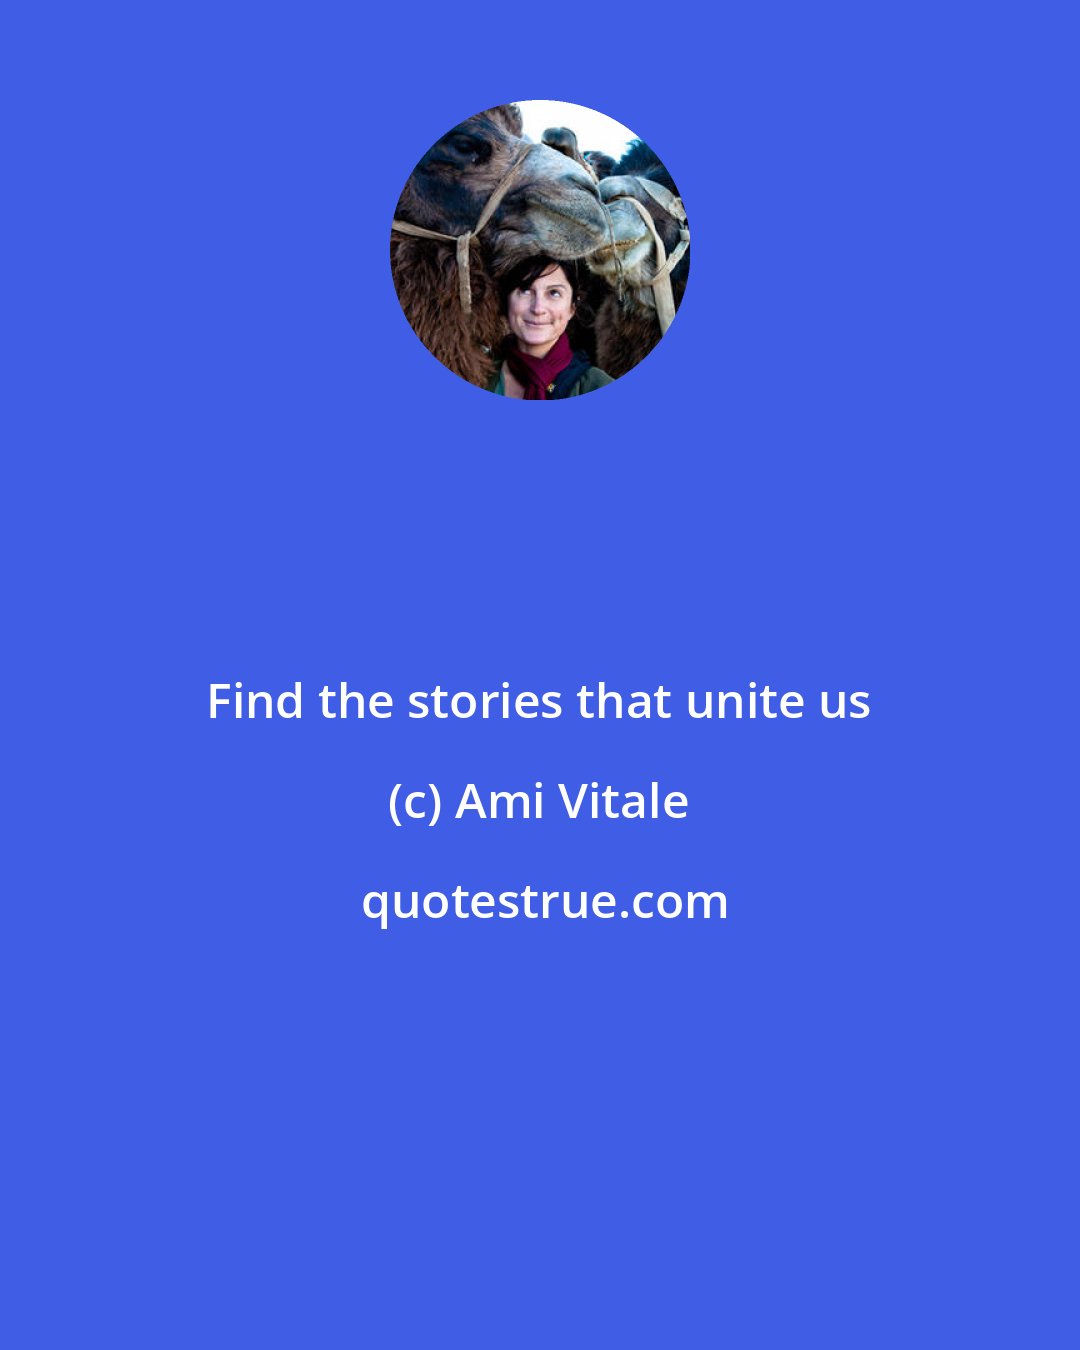 Ami Vitale: Find the stories that unite us